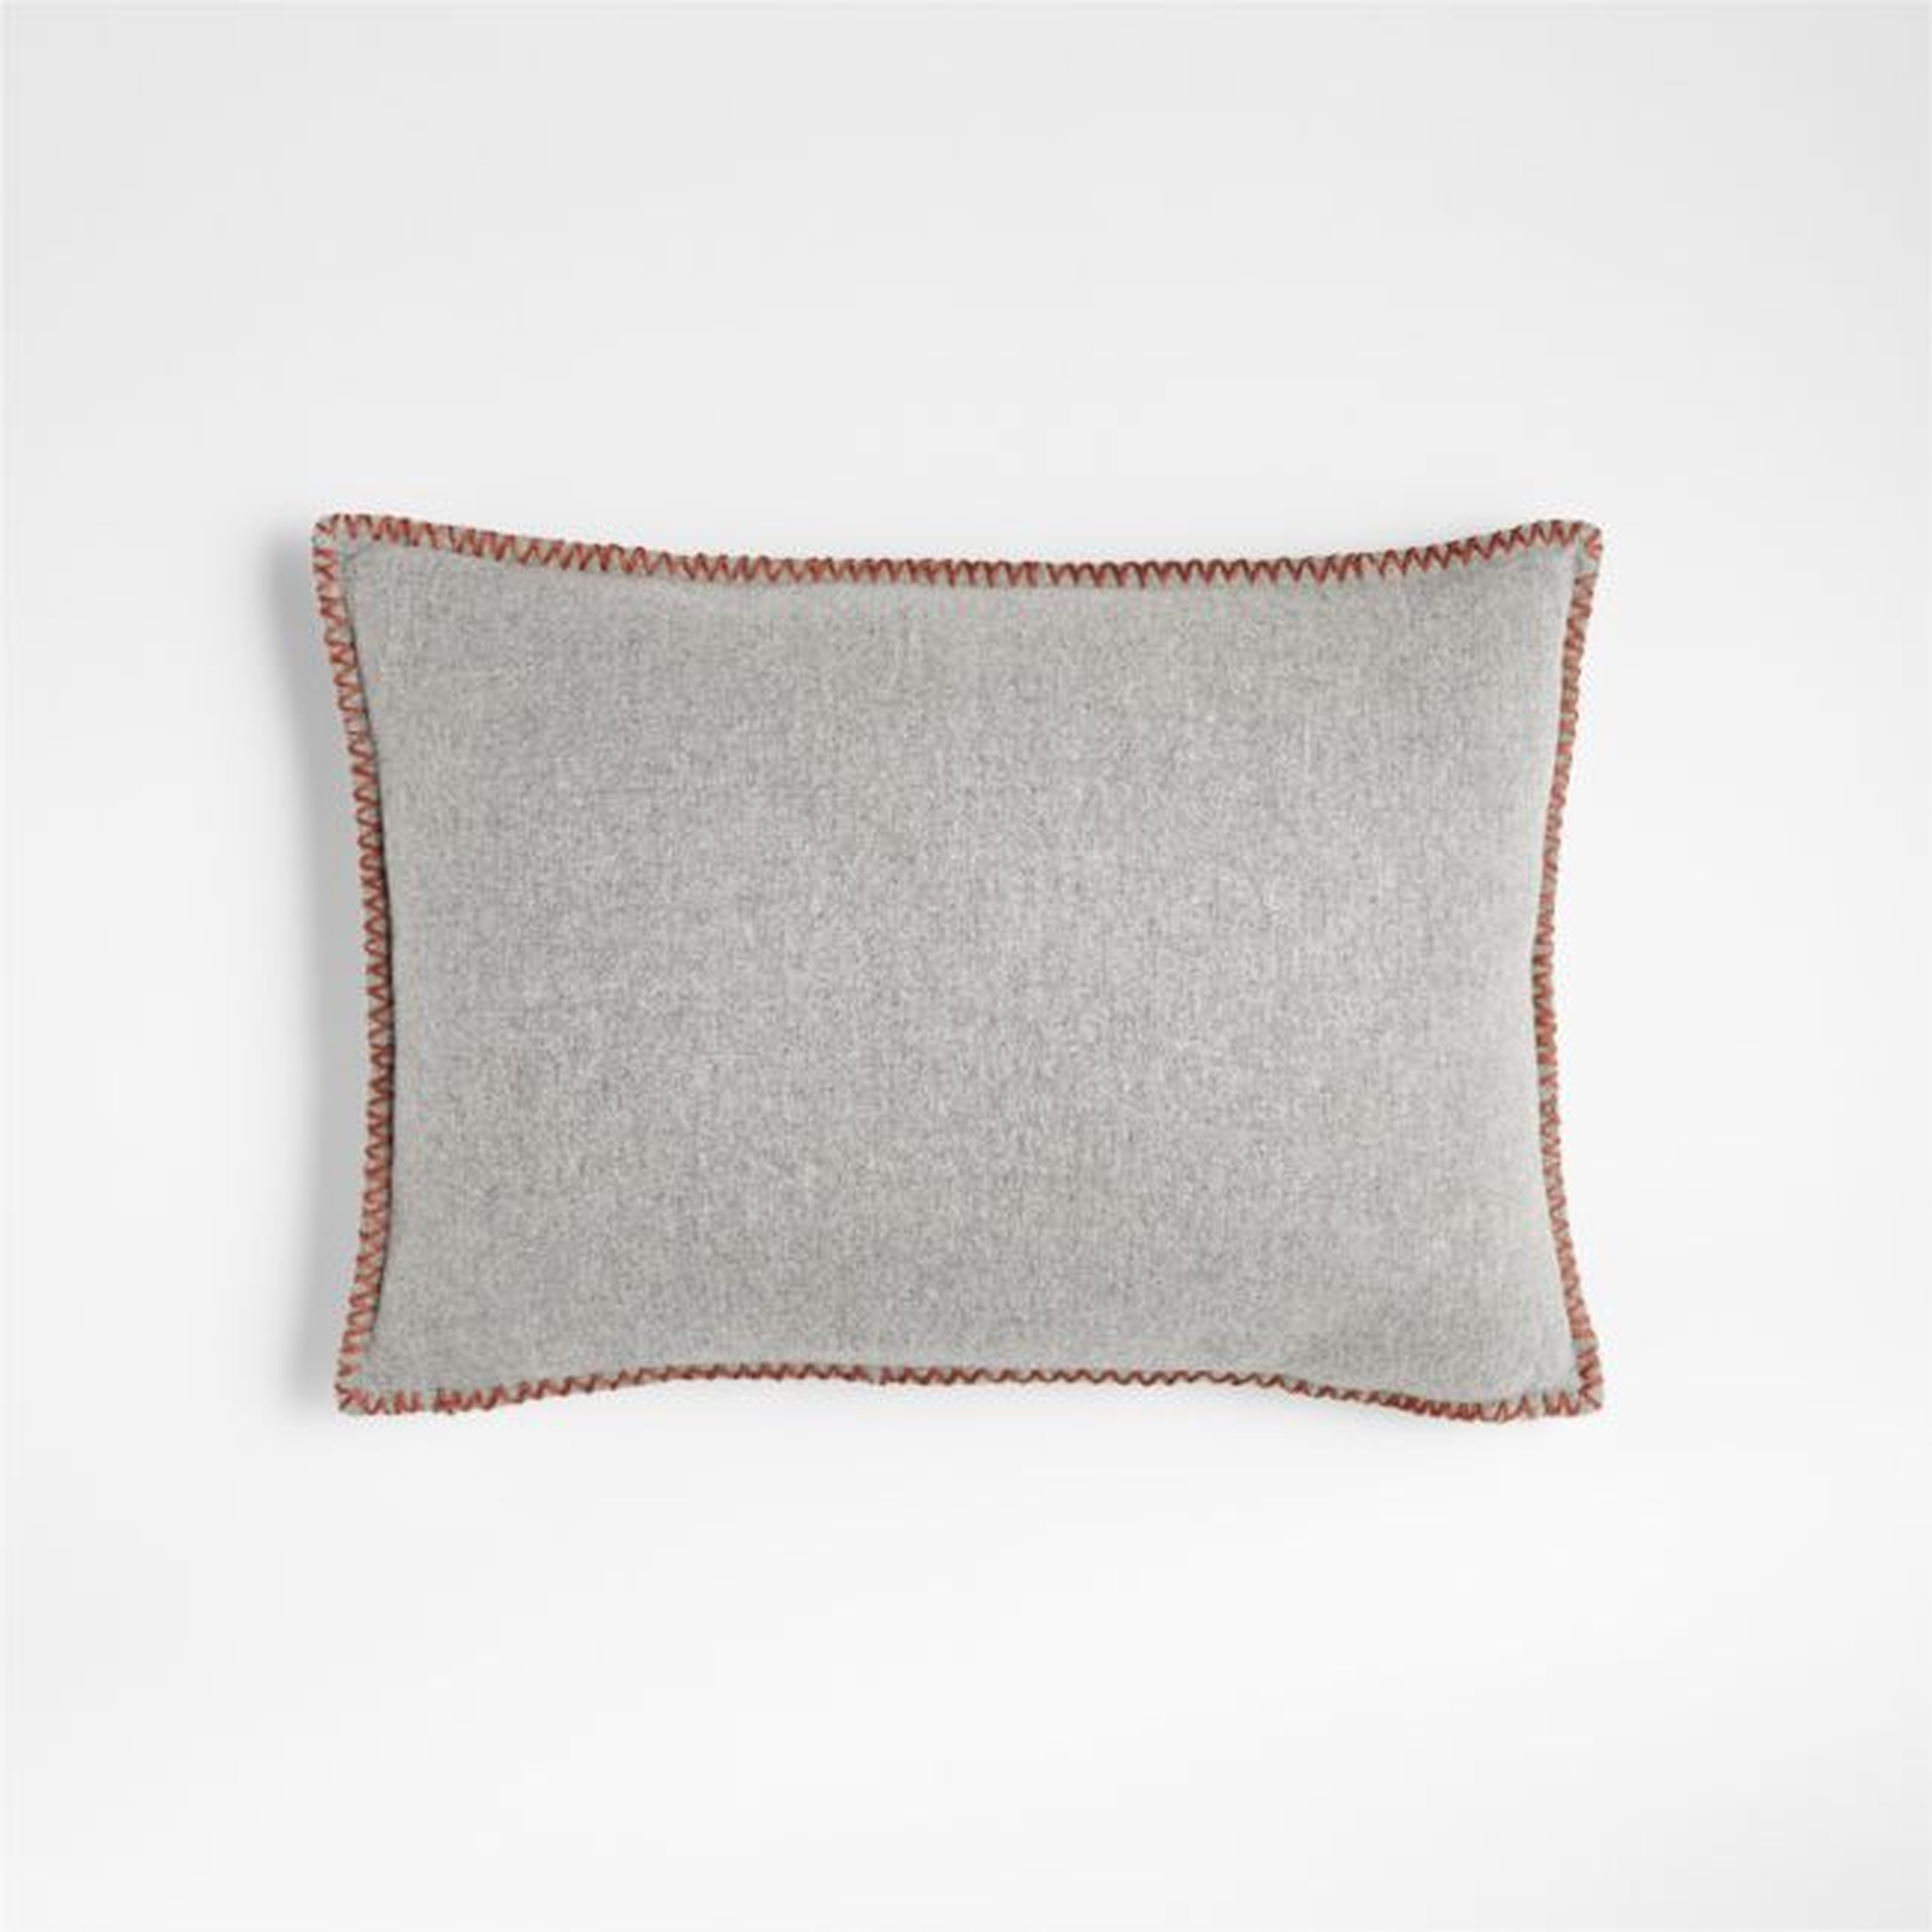 Taloga 22"x15" Grey Pillow Cover with Down-Alternative Insert - Crate and Barrel